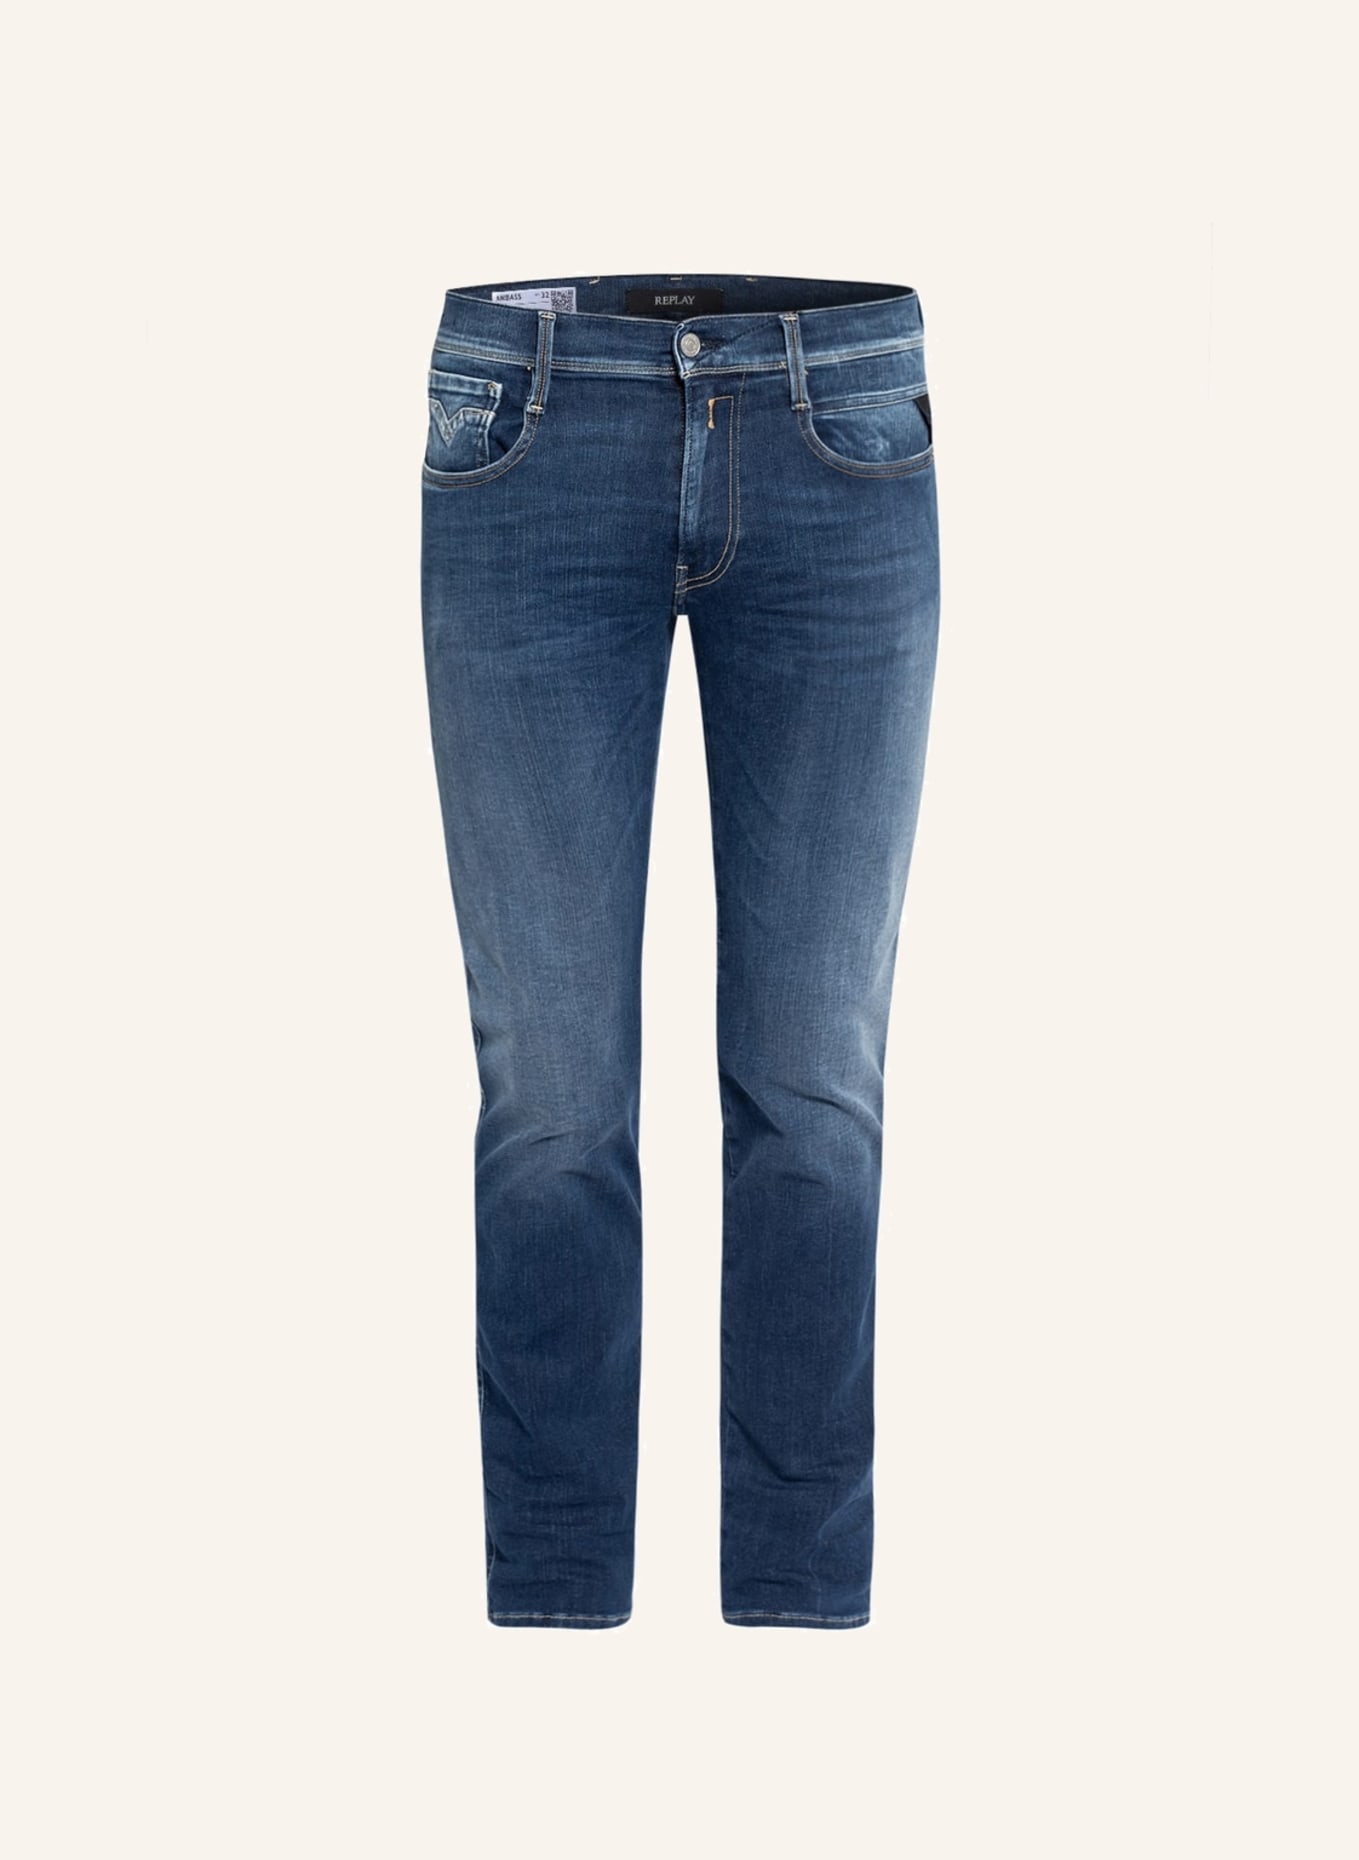 REPLAY Jeans ANBASS RE-USED Slim Fit, Farbe: 007 DARK BLUE(Bild null)